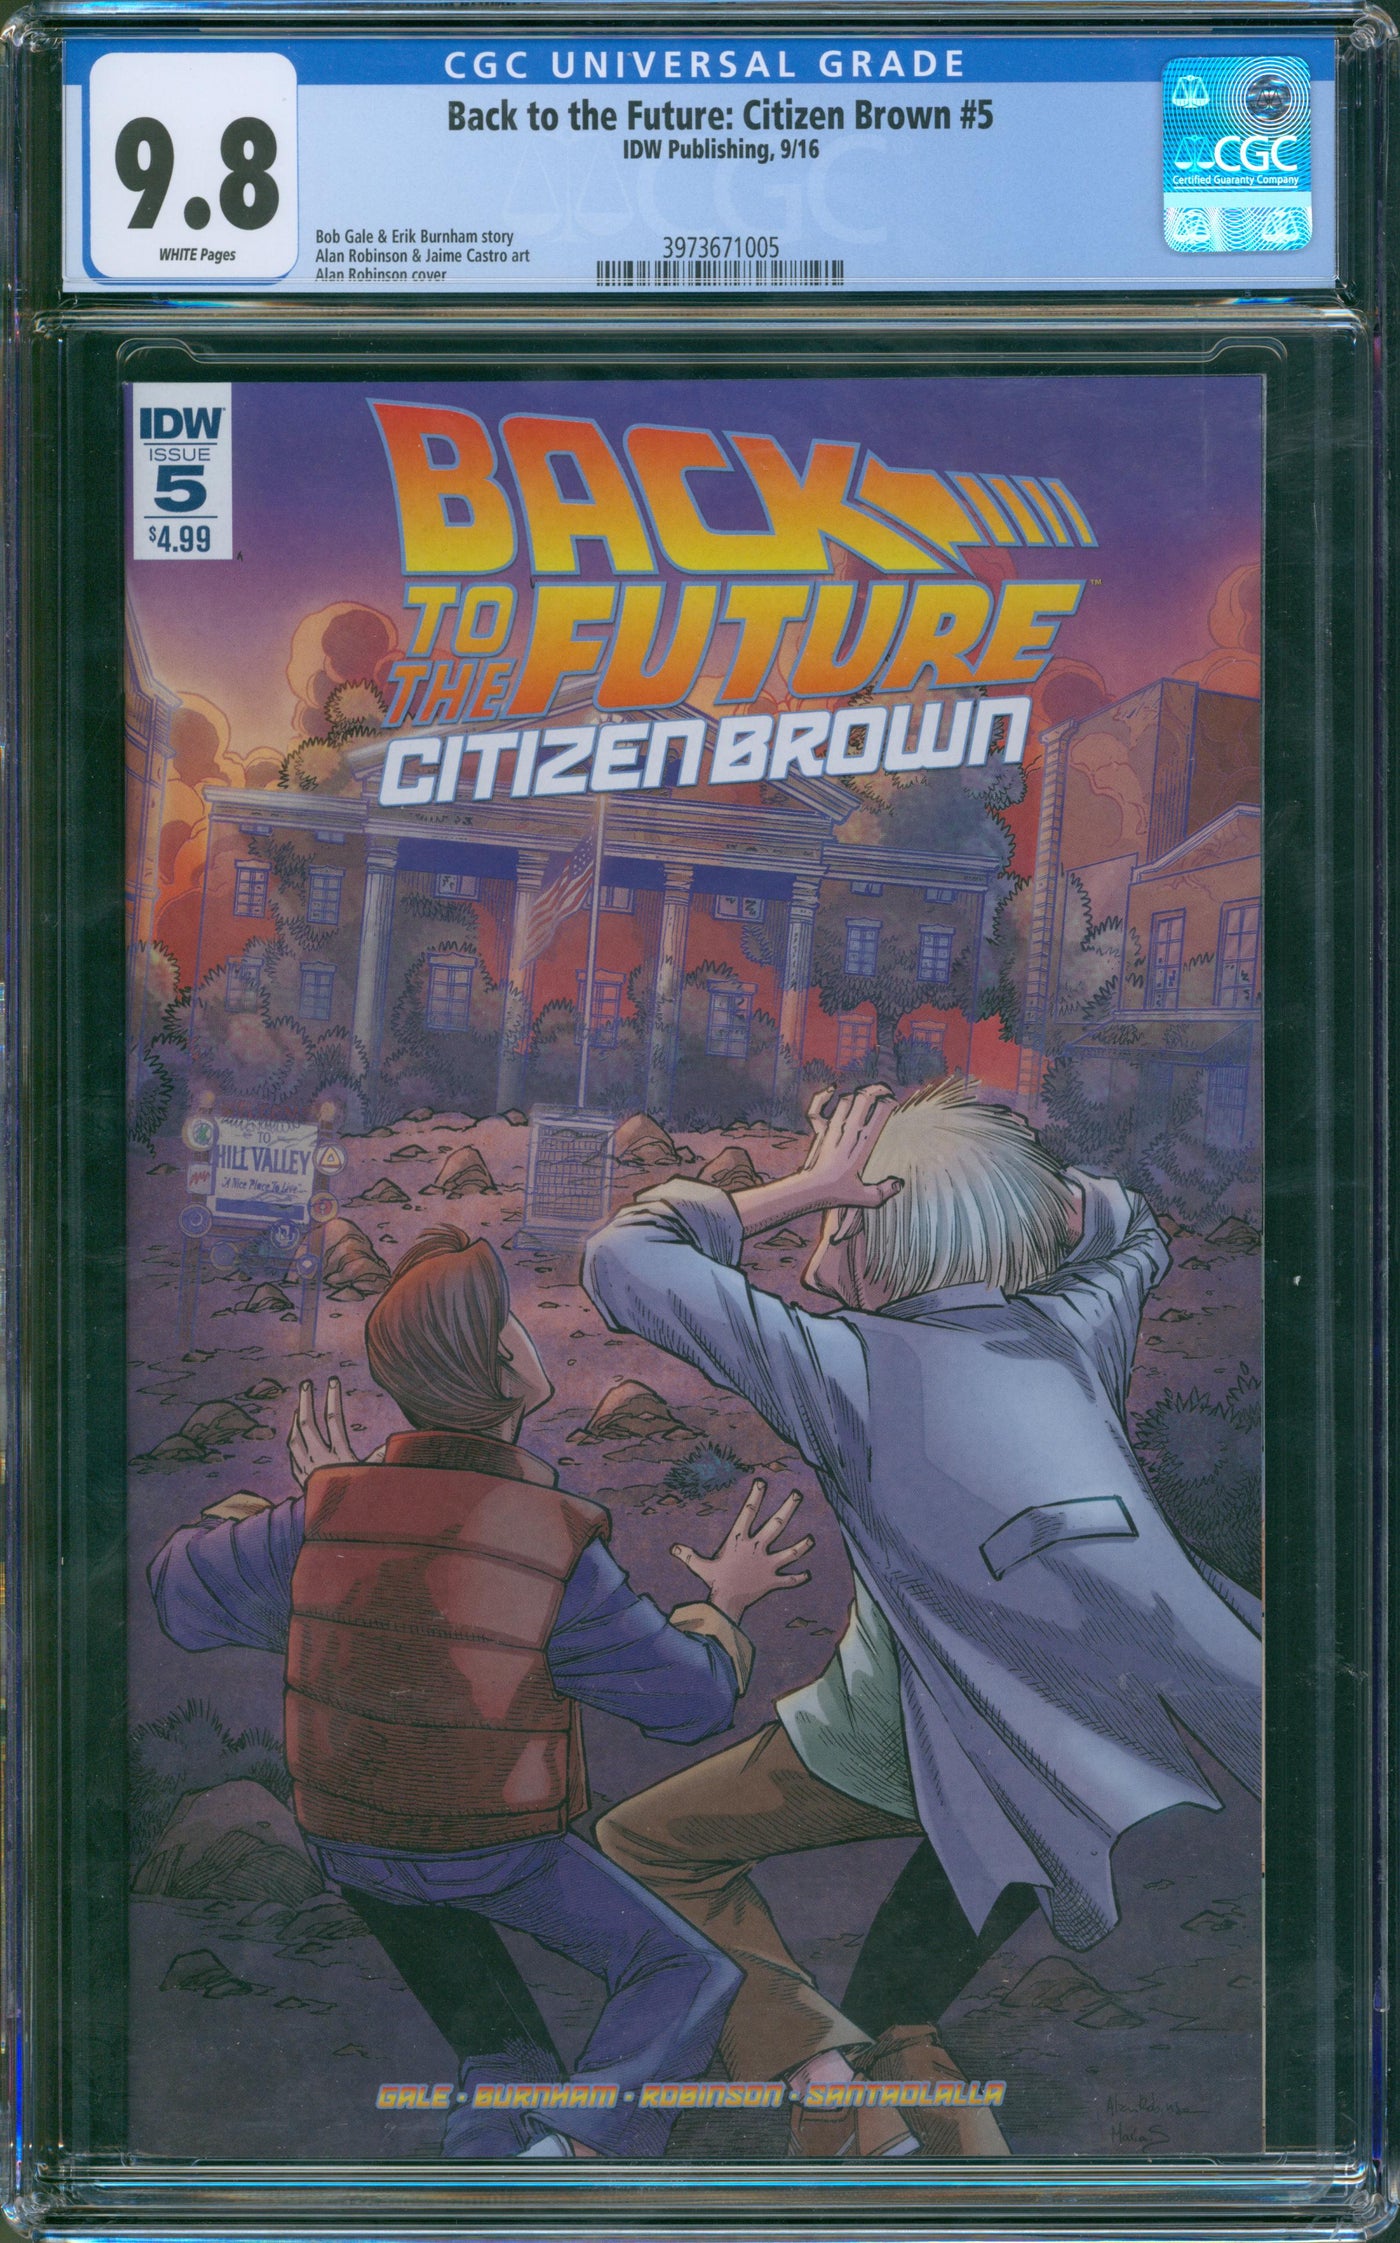 Back to the future citizen brown #5 CGC 9.8